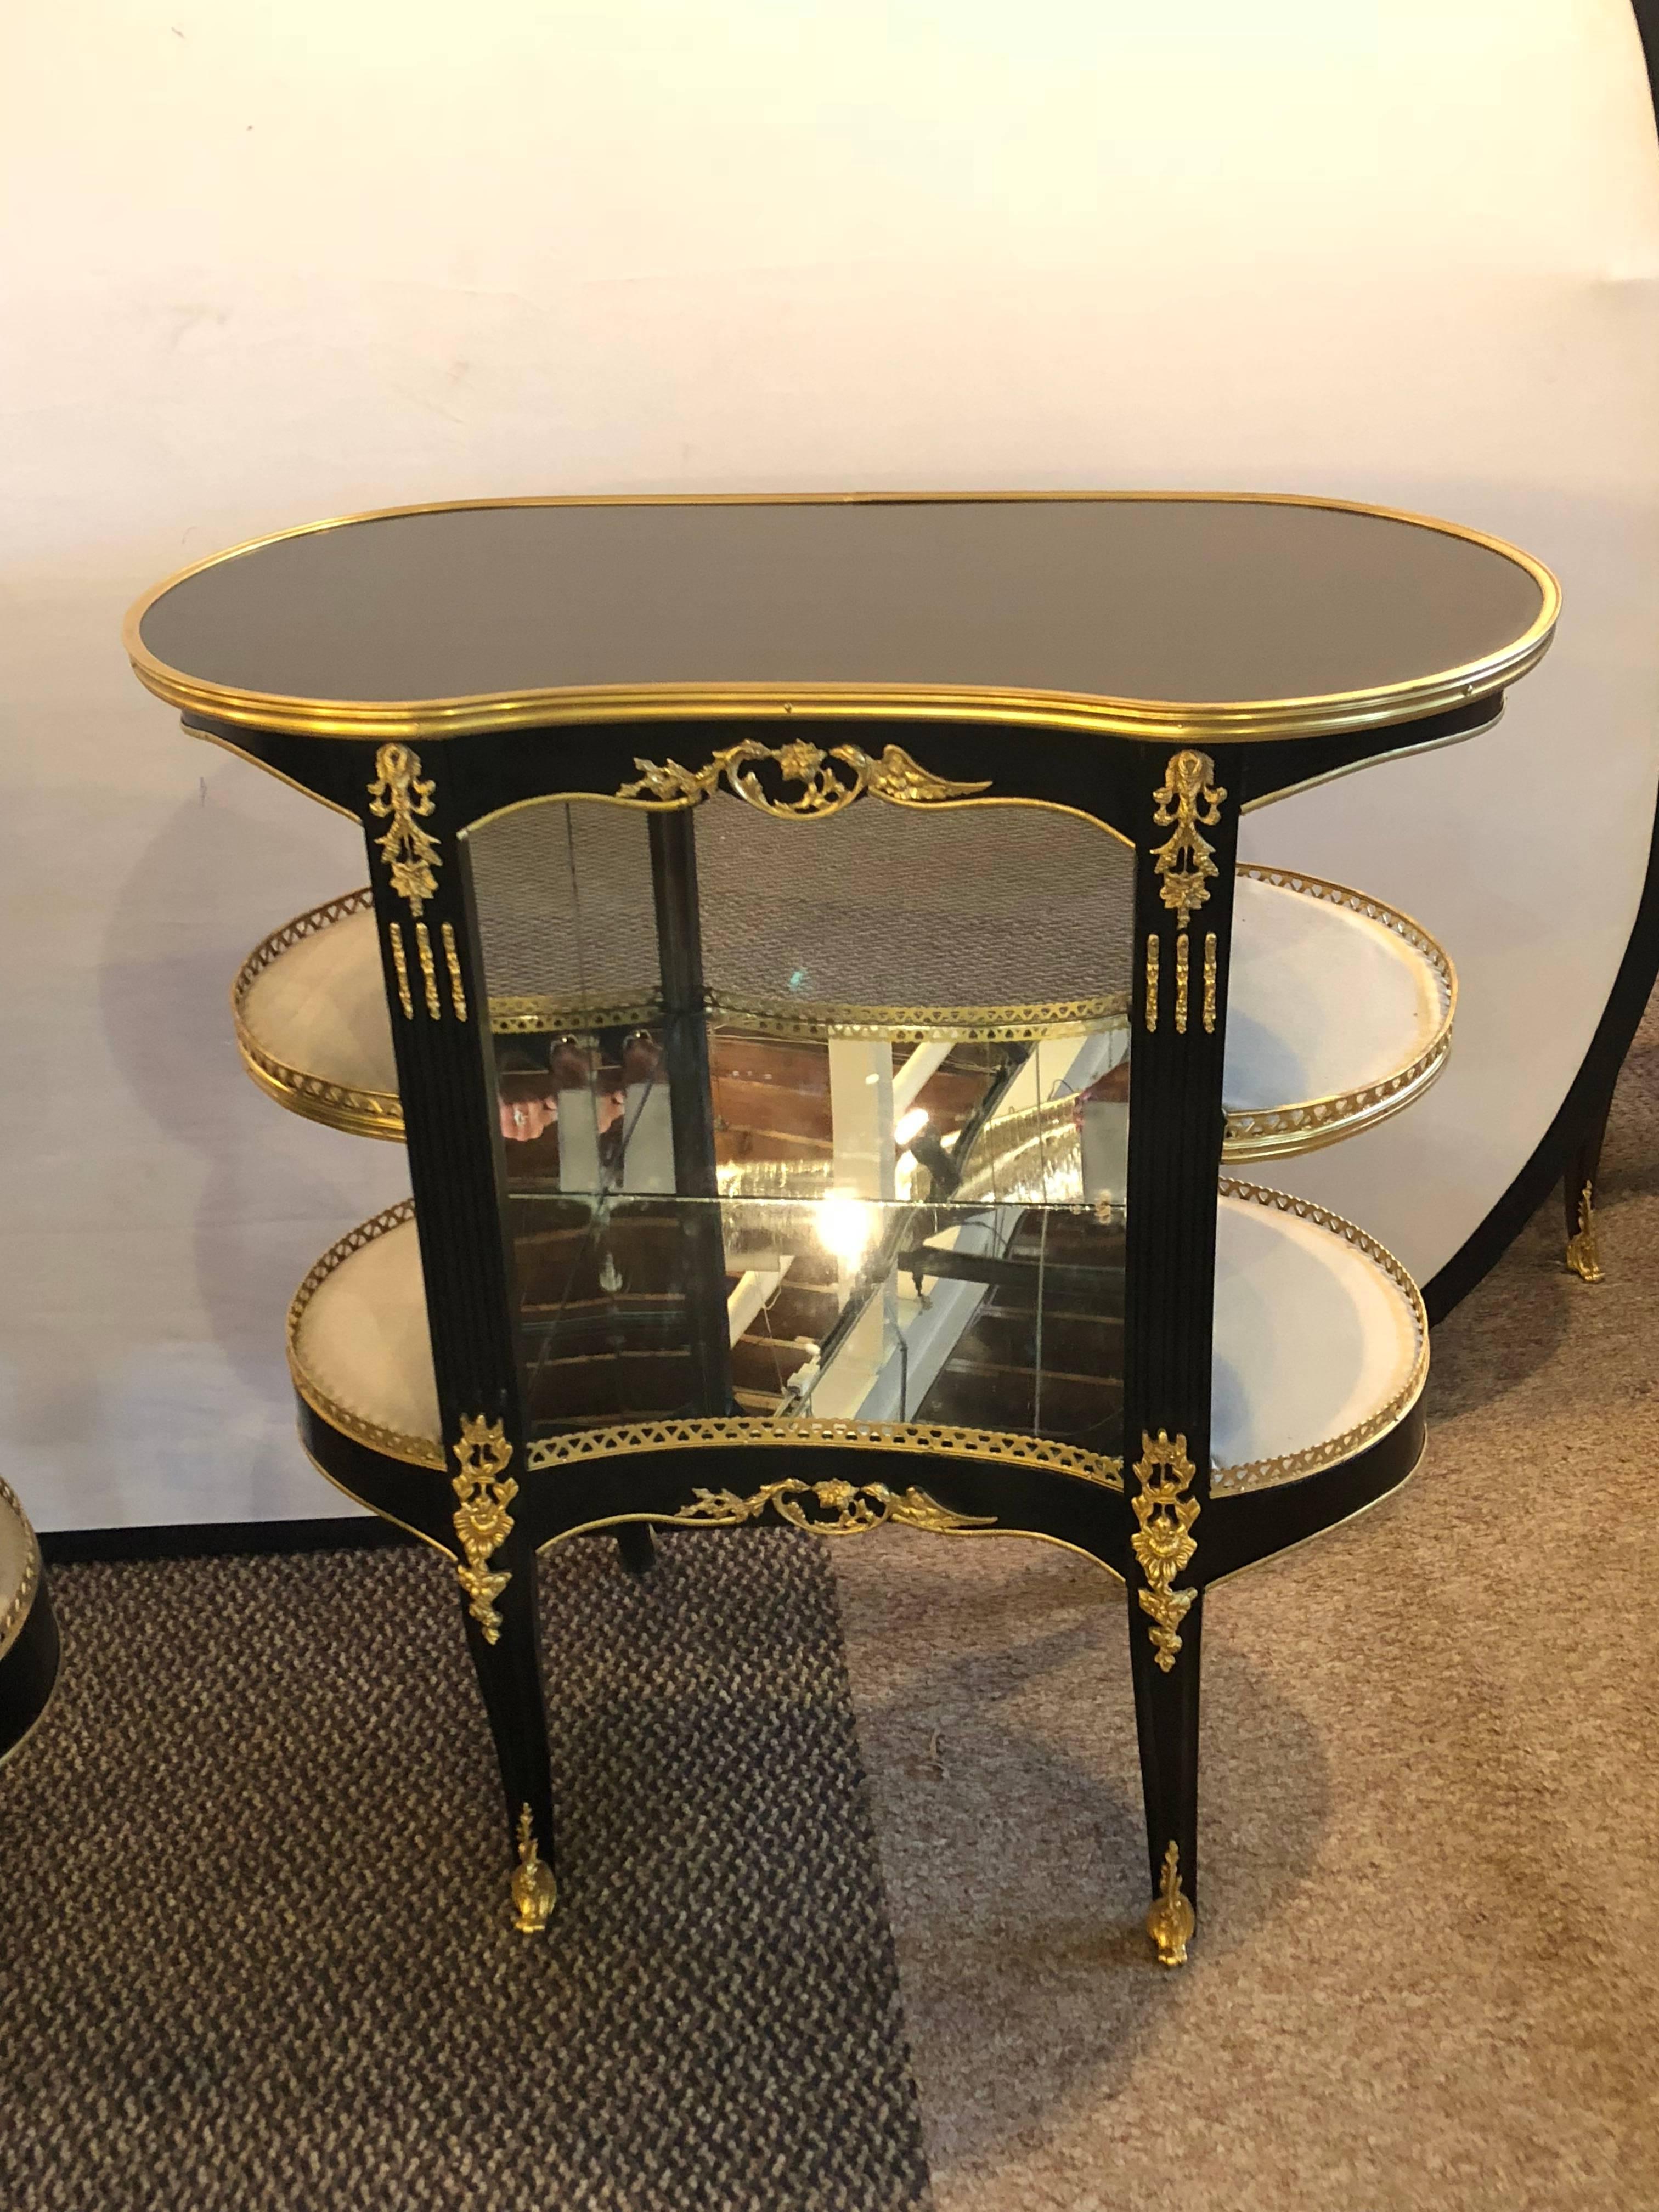 A very fine and decorative pair of Louis XV Hollywood Regency style ebony Vitrine form end tables or nightstands. These custom quality nightstands can be used as end tables or showcase pieces in a vestibule. The bonze mounts are wonderfully cast in